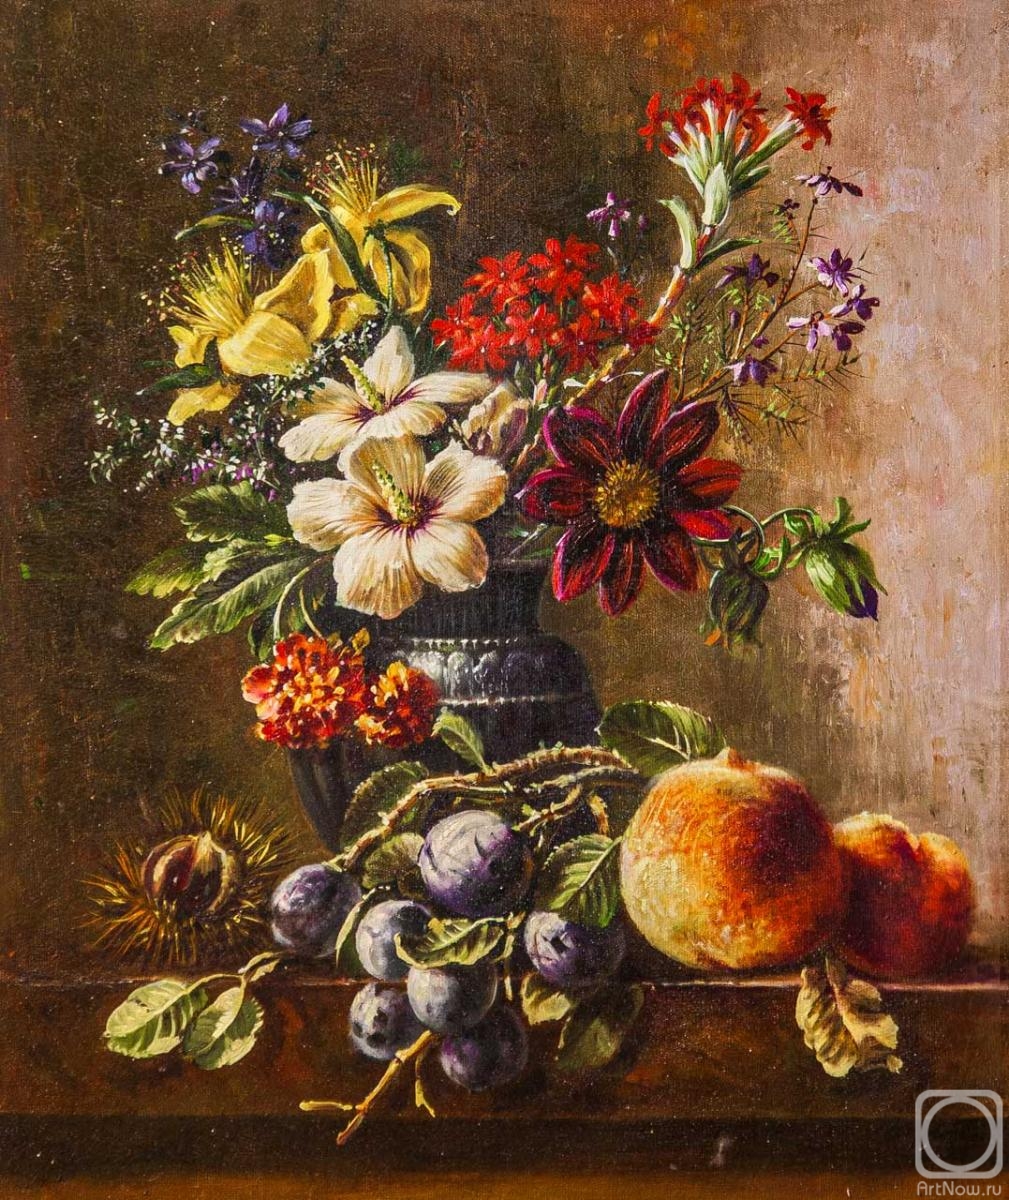 Kamskij Savelij. A copy of the painting by Georg Jacob Johann van Os' Flowers in a vase with chestnuts, plums and peaches on the ledge